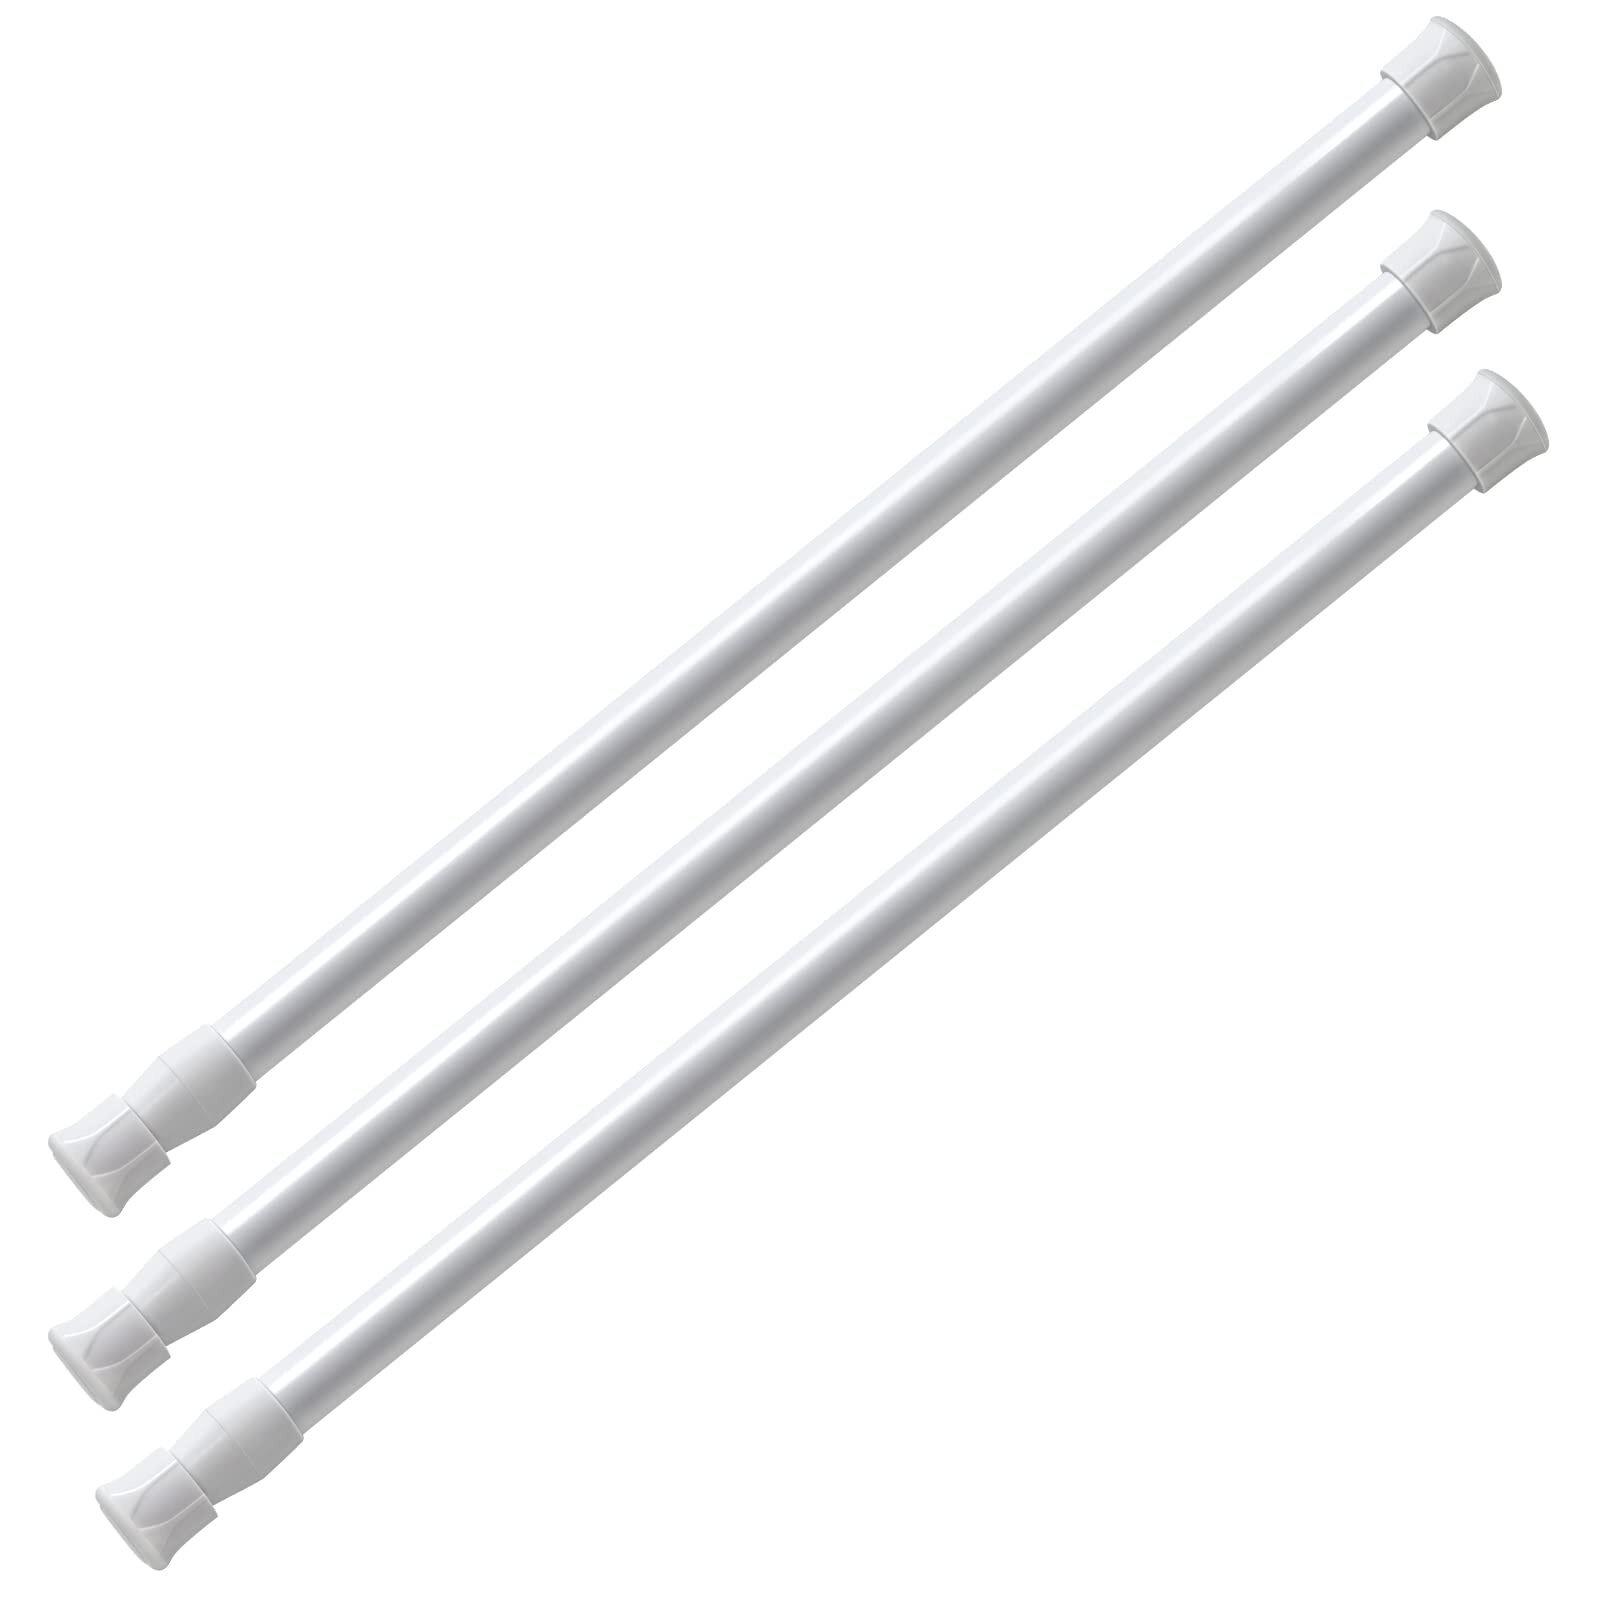 White Extendable Metal Tension Rod 10-13mm